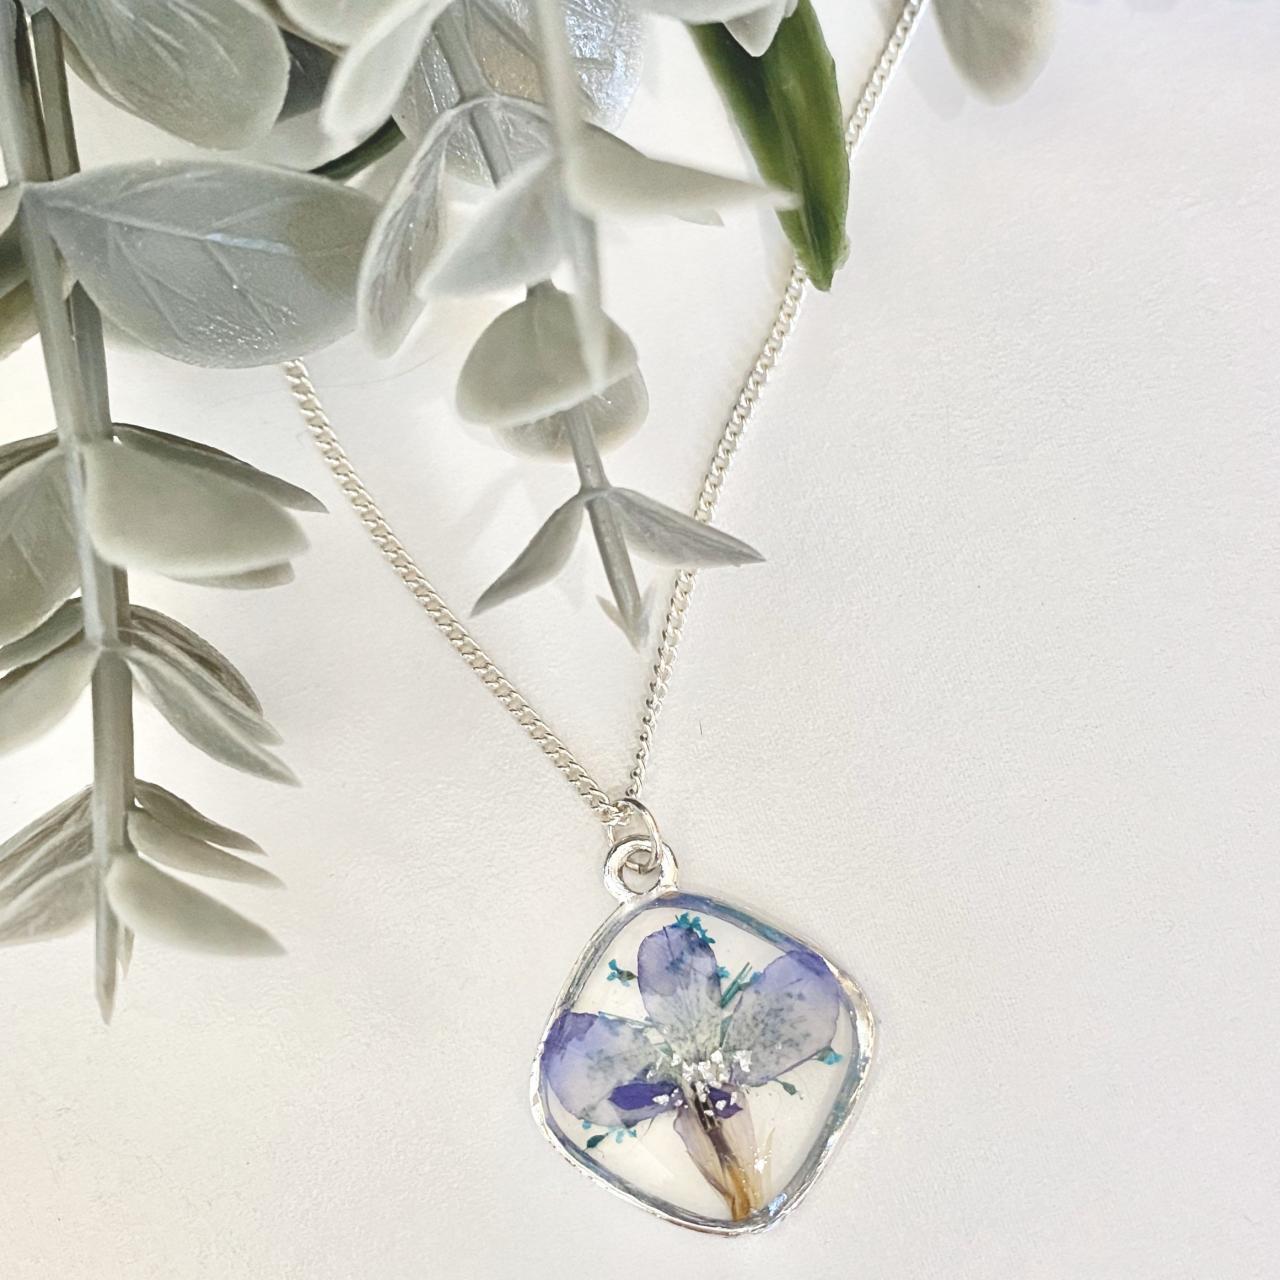 Real Pressed Dried Flowers/ Diamond Shape Resin Dainty Necklace